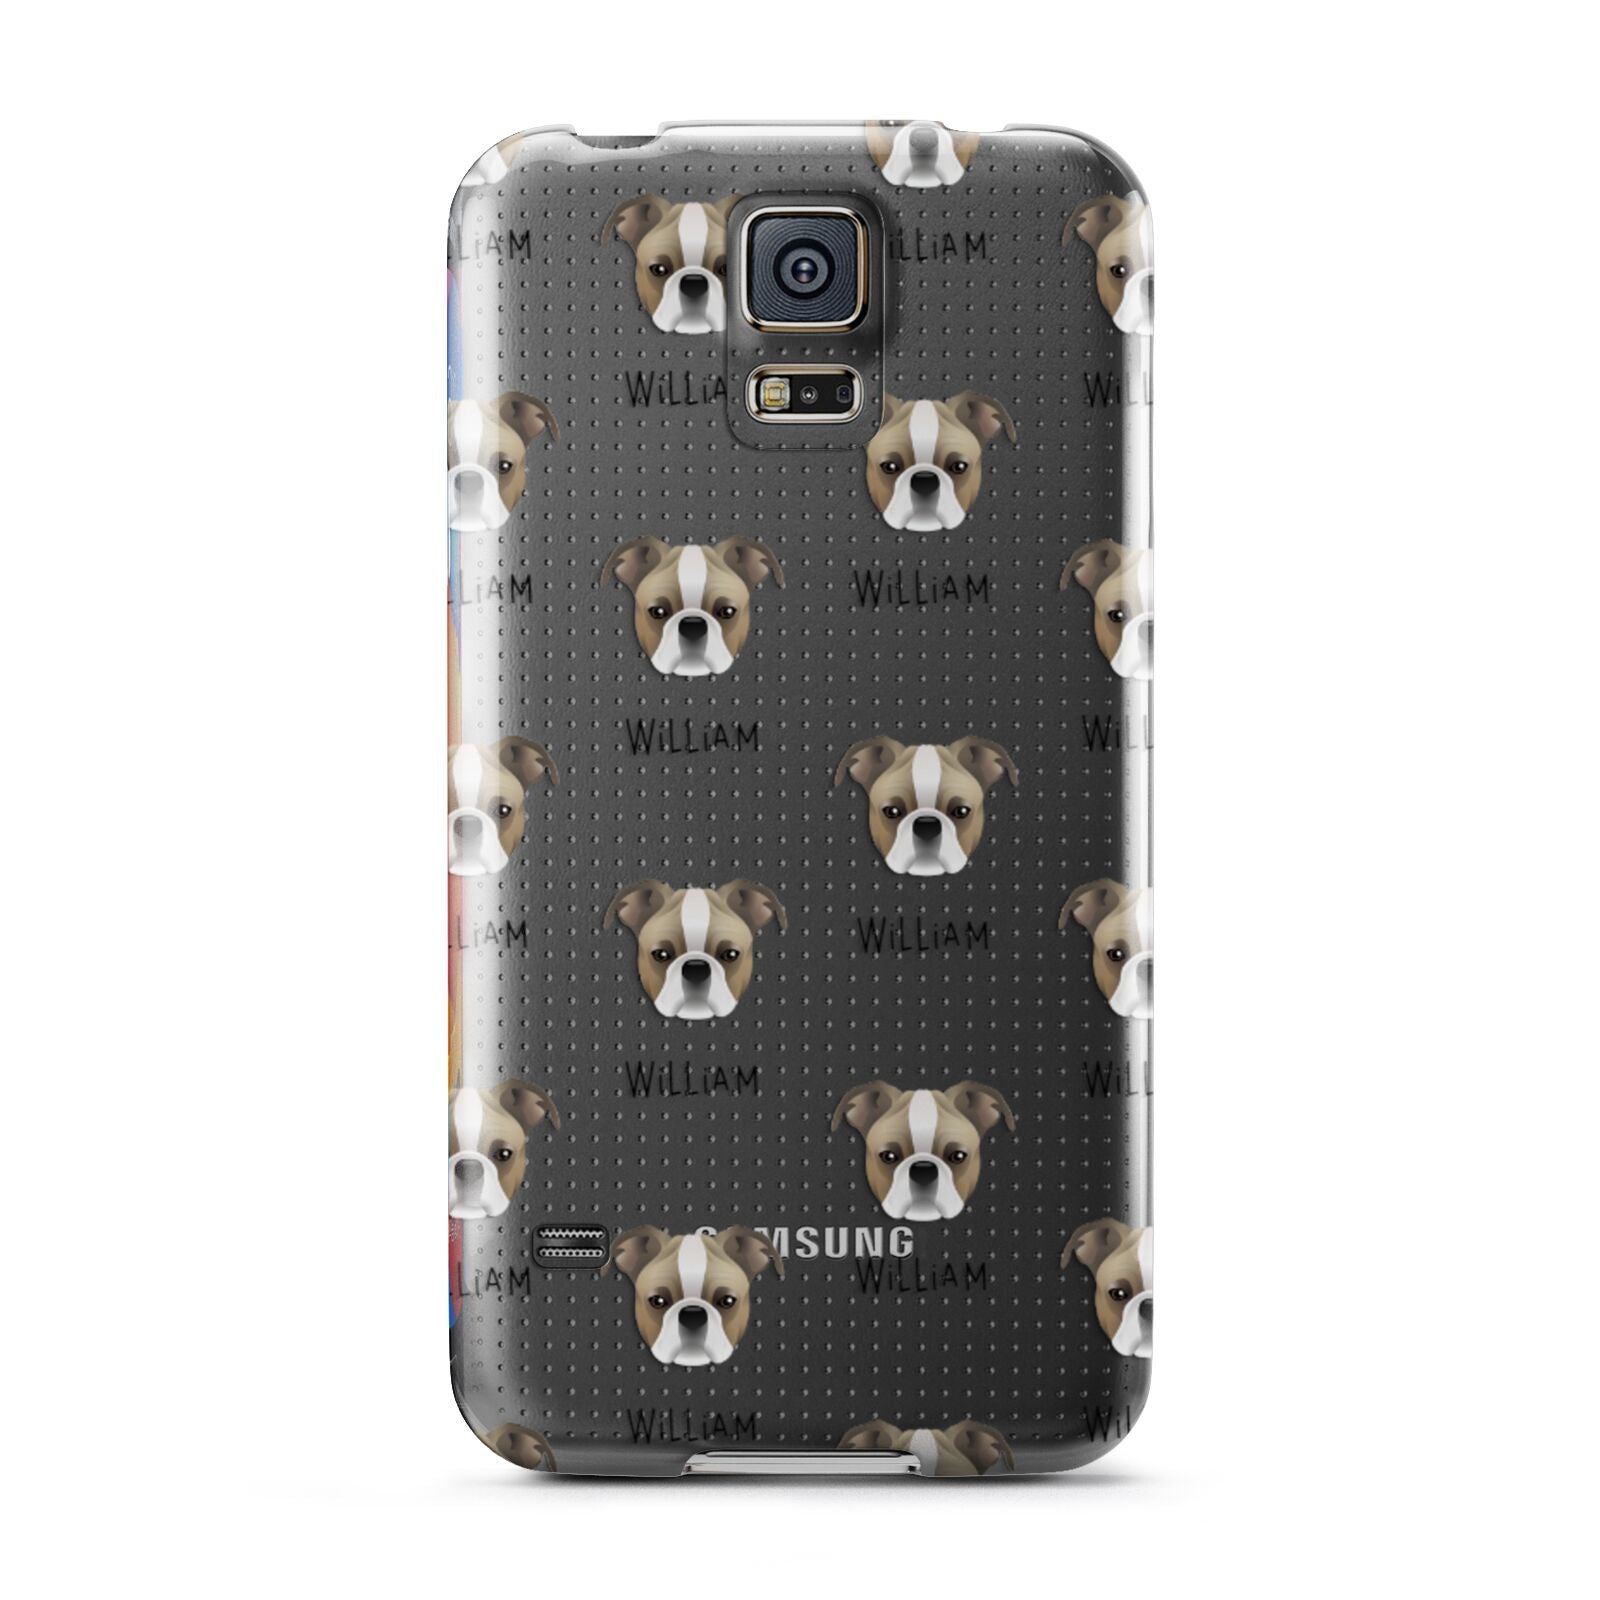 Bugg Icon with Name Samsung Galaxy S5 Case